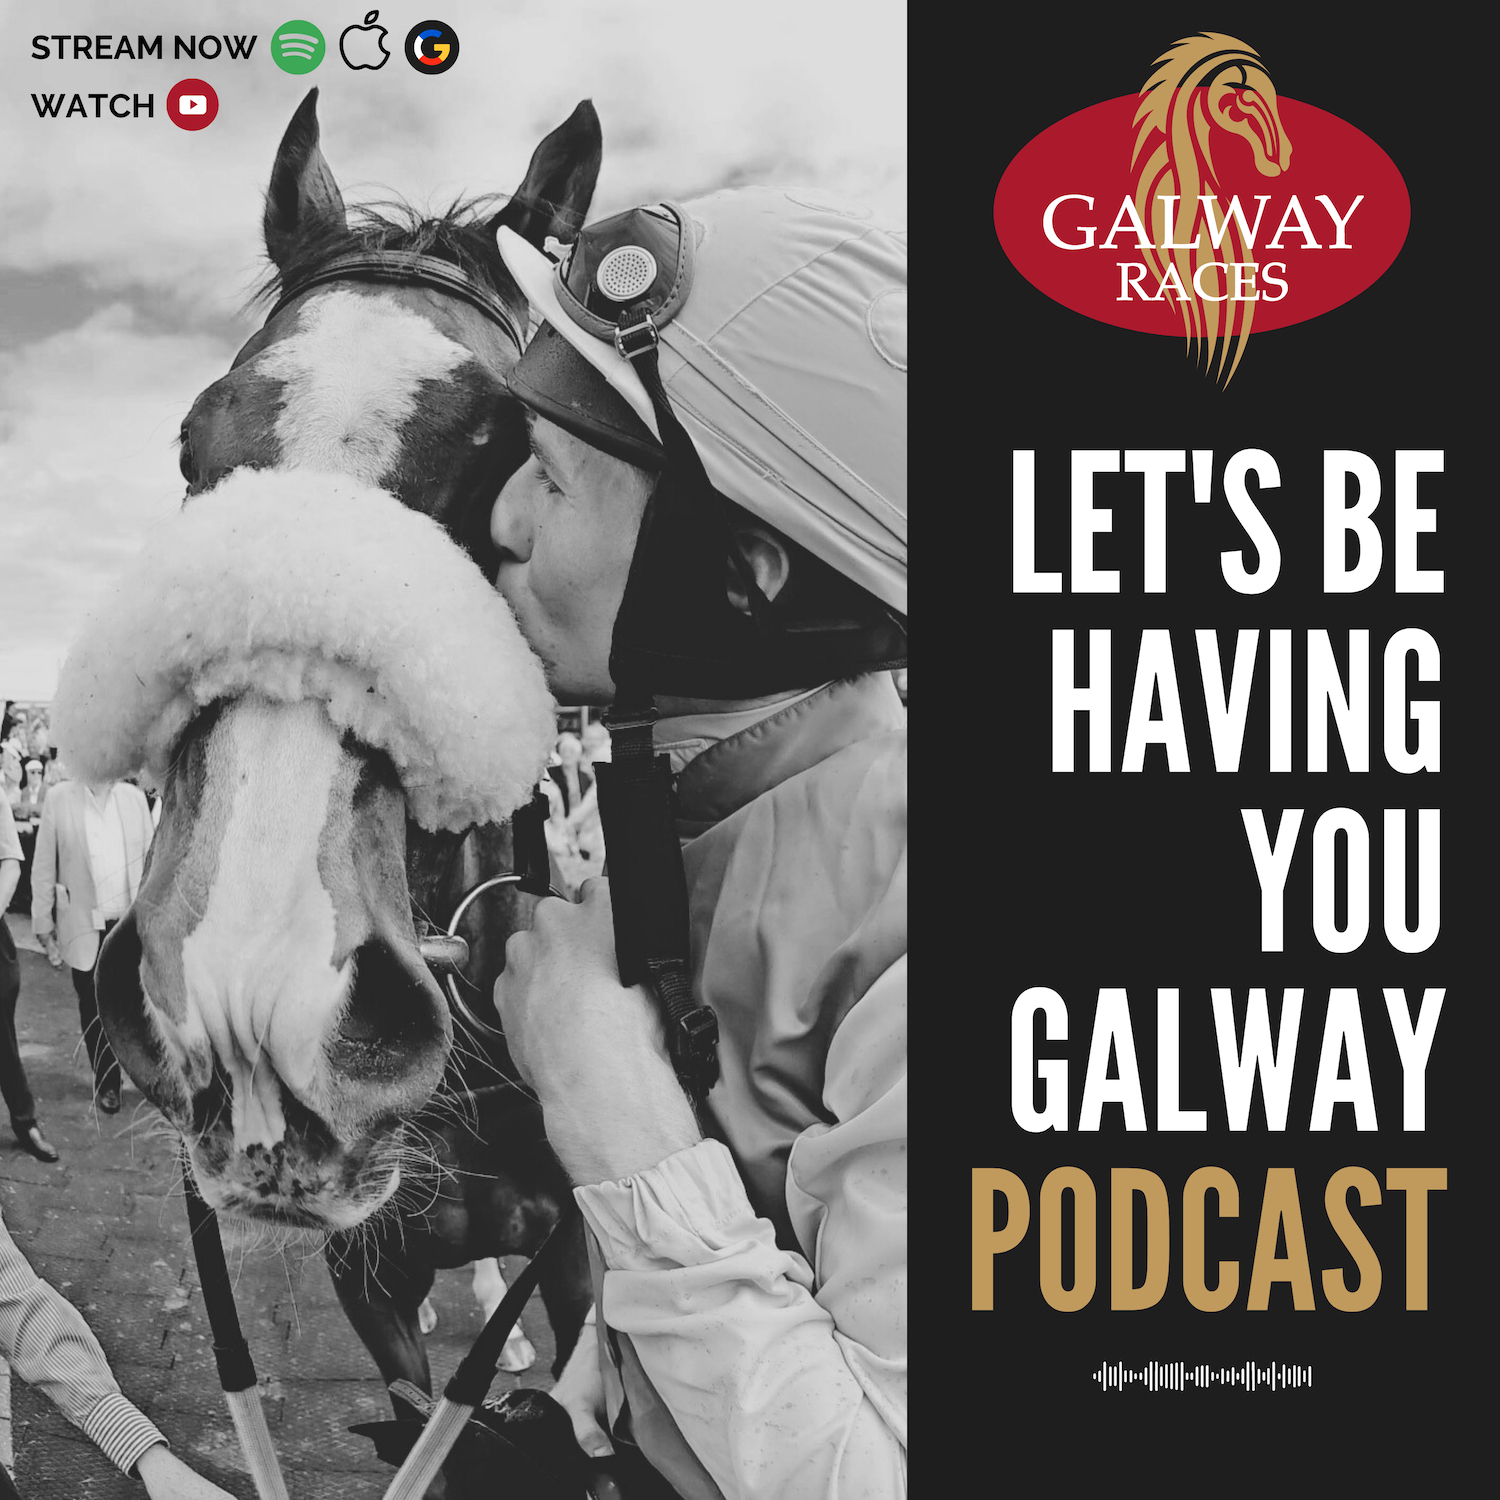 Galway Races - Let’s Be Having You Galway Podcast